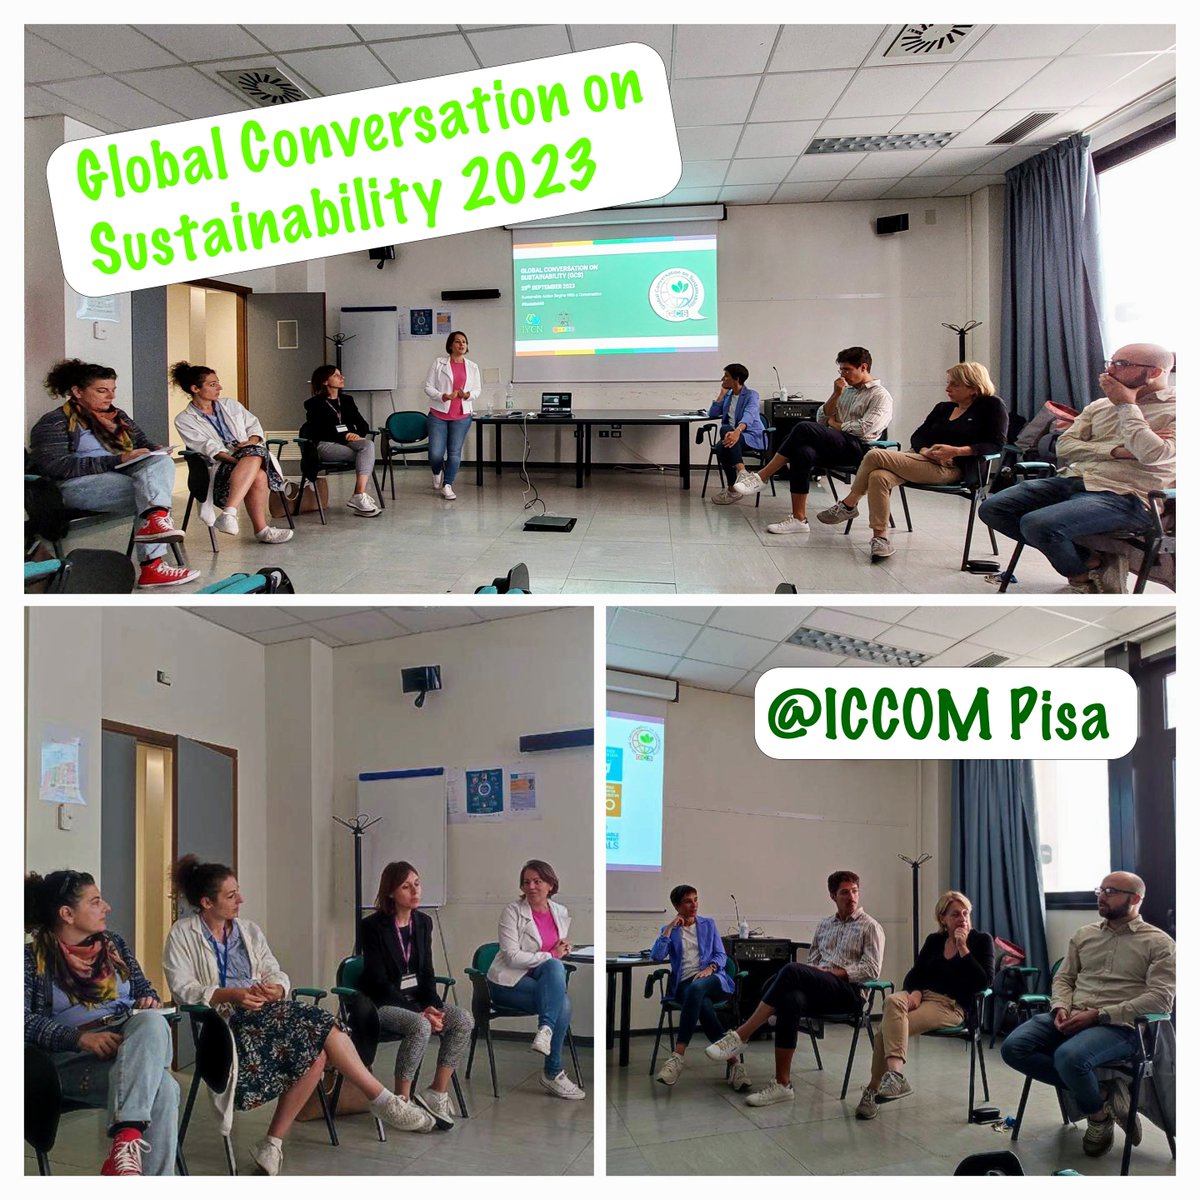 ICCOM Pisa joined the Global Conversation on Sustainability @GCS_Day! 
Thank you all for coming and discuss sustainability aspects of our various current research. #analytical_chemistry 
#macromolecules
#NMR of materials 
#theoretical_chemistry  
#catalysis